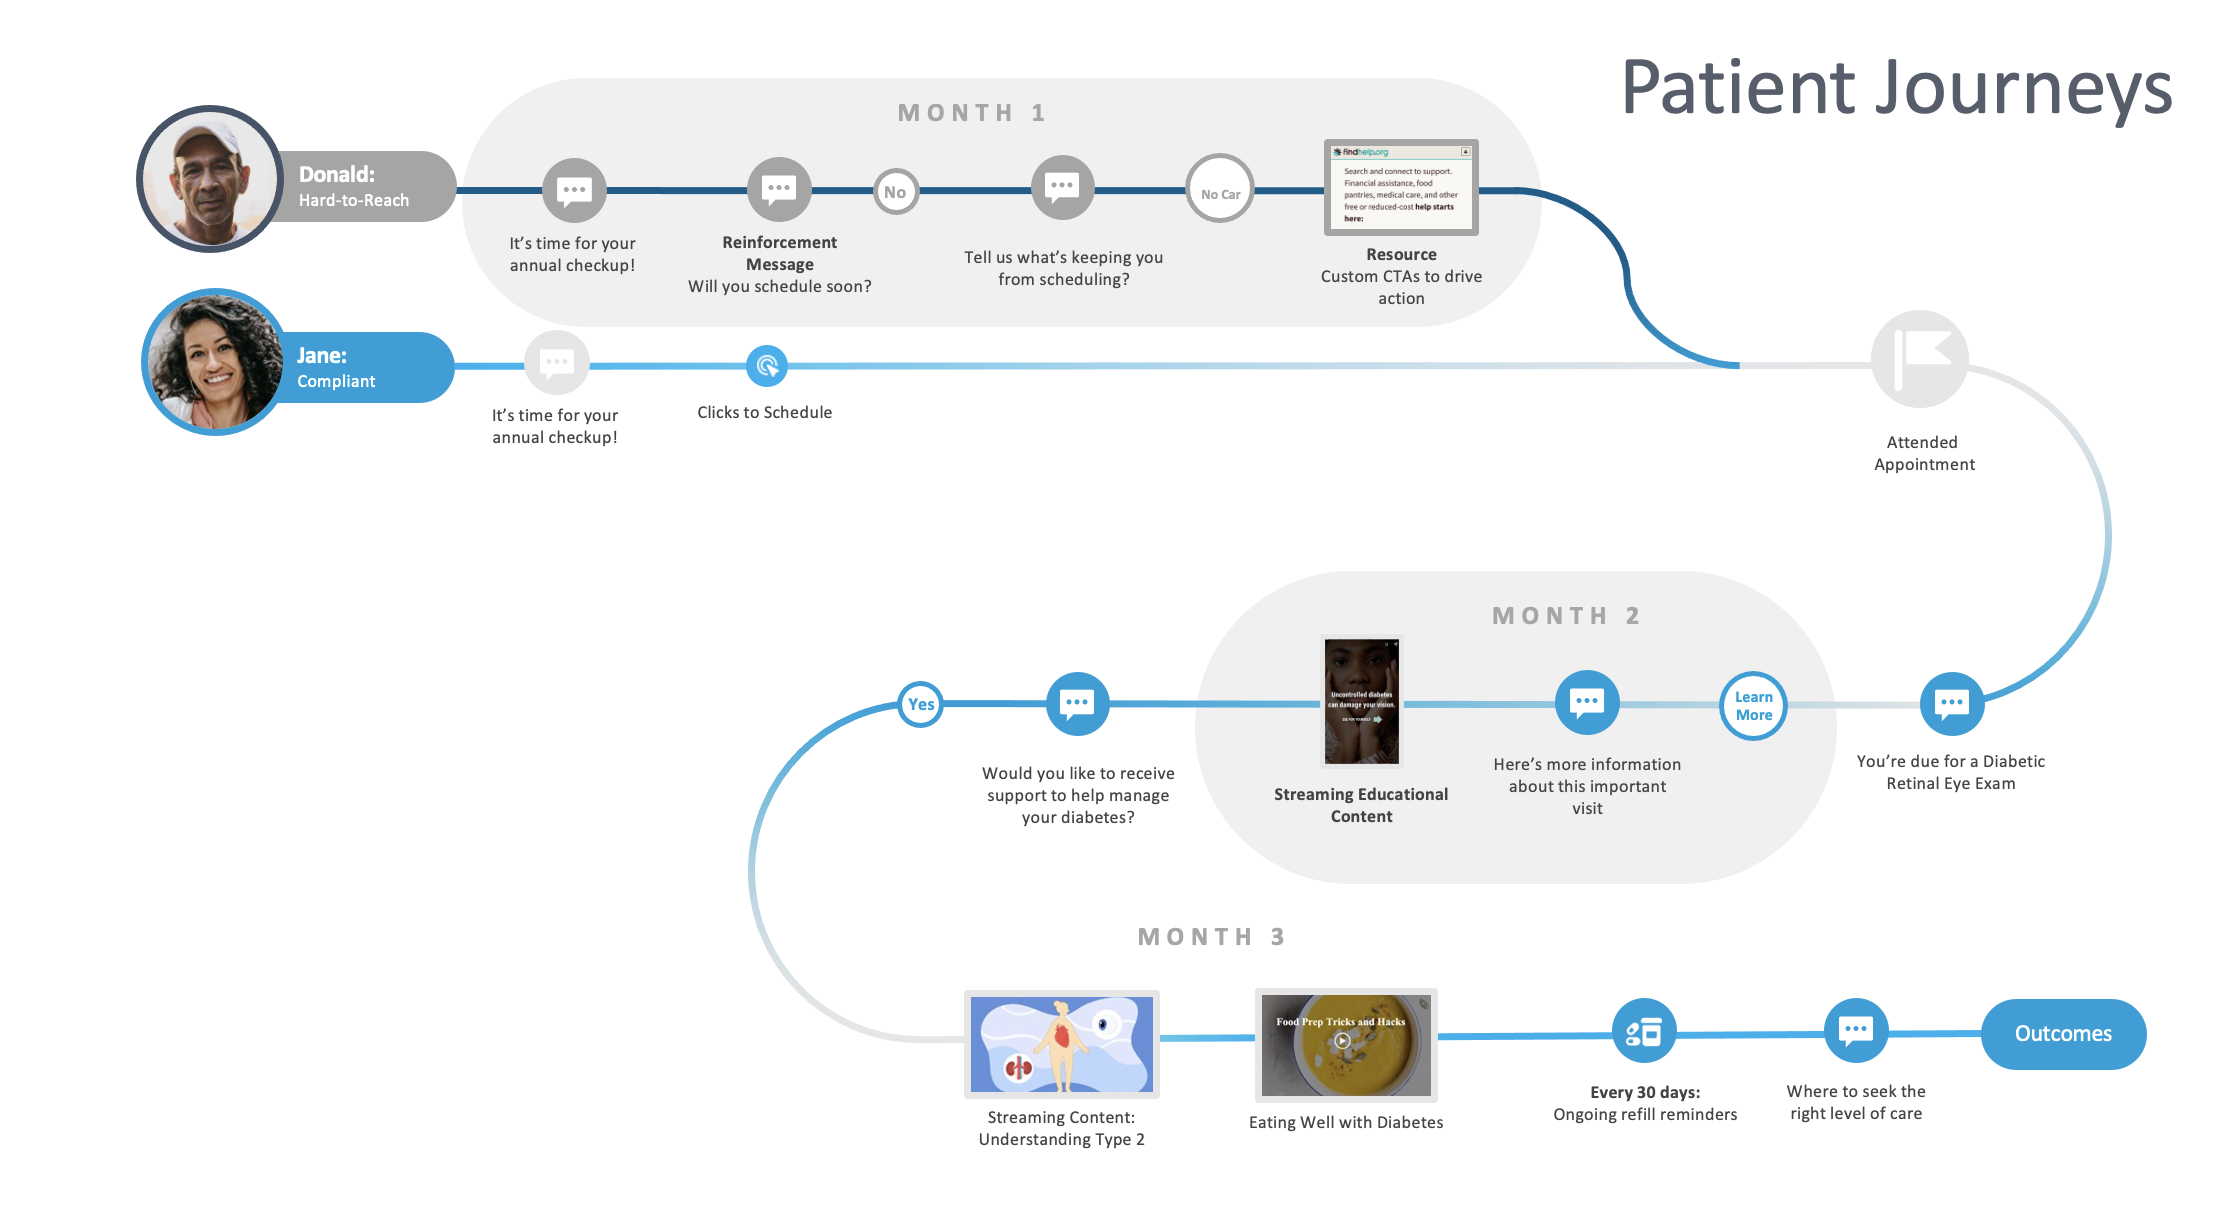 mPulse's optimized patient journey ensures a seamless, informed, and empowered healthcare experience